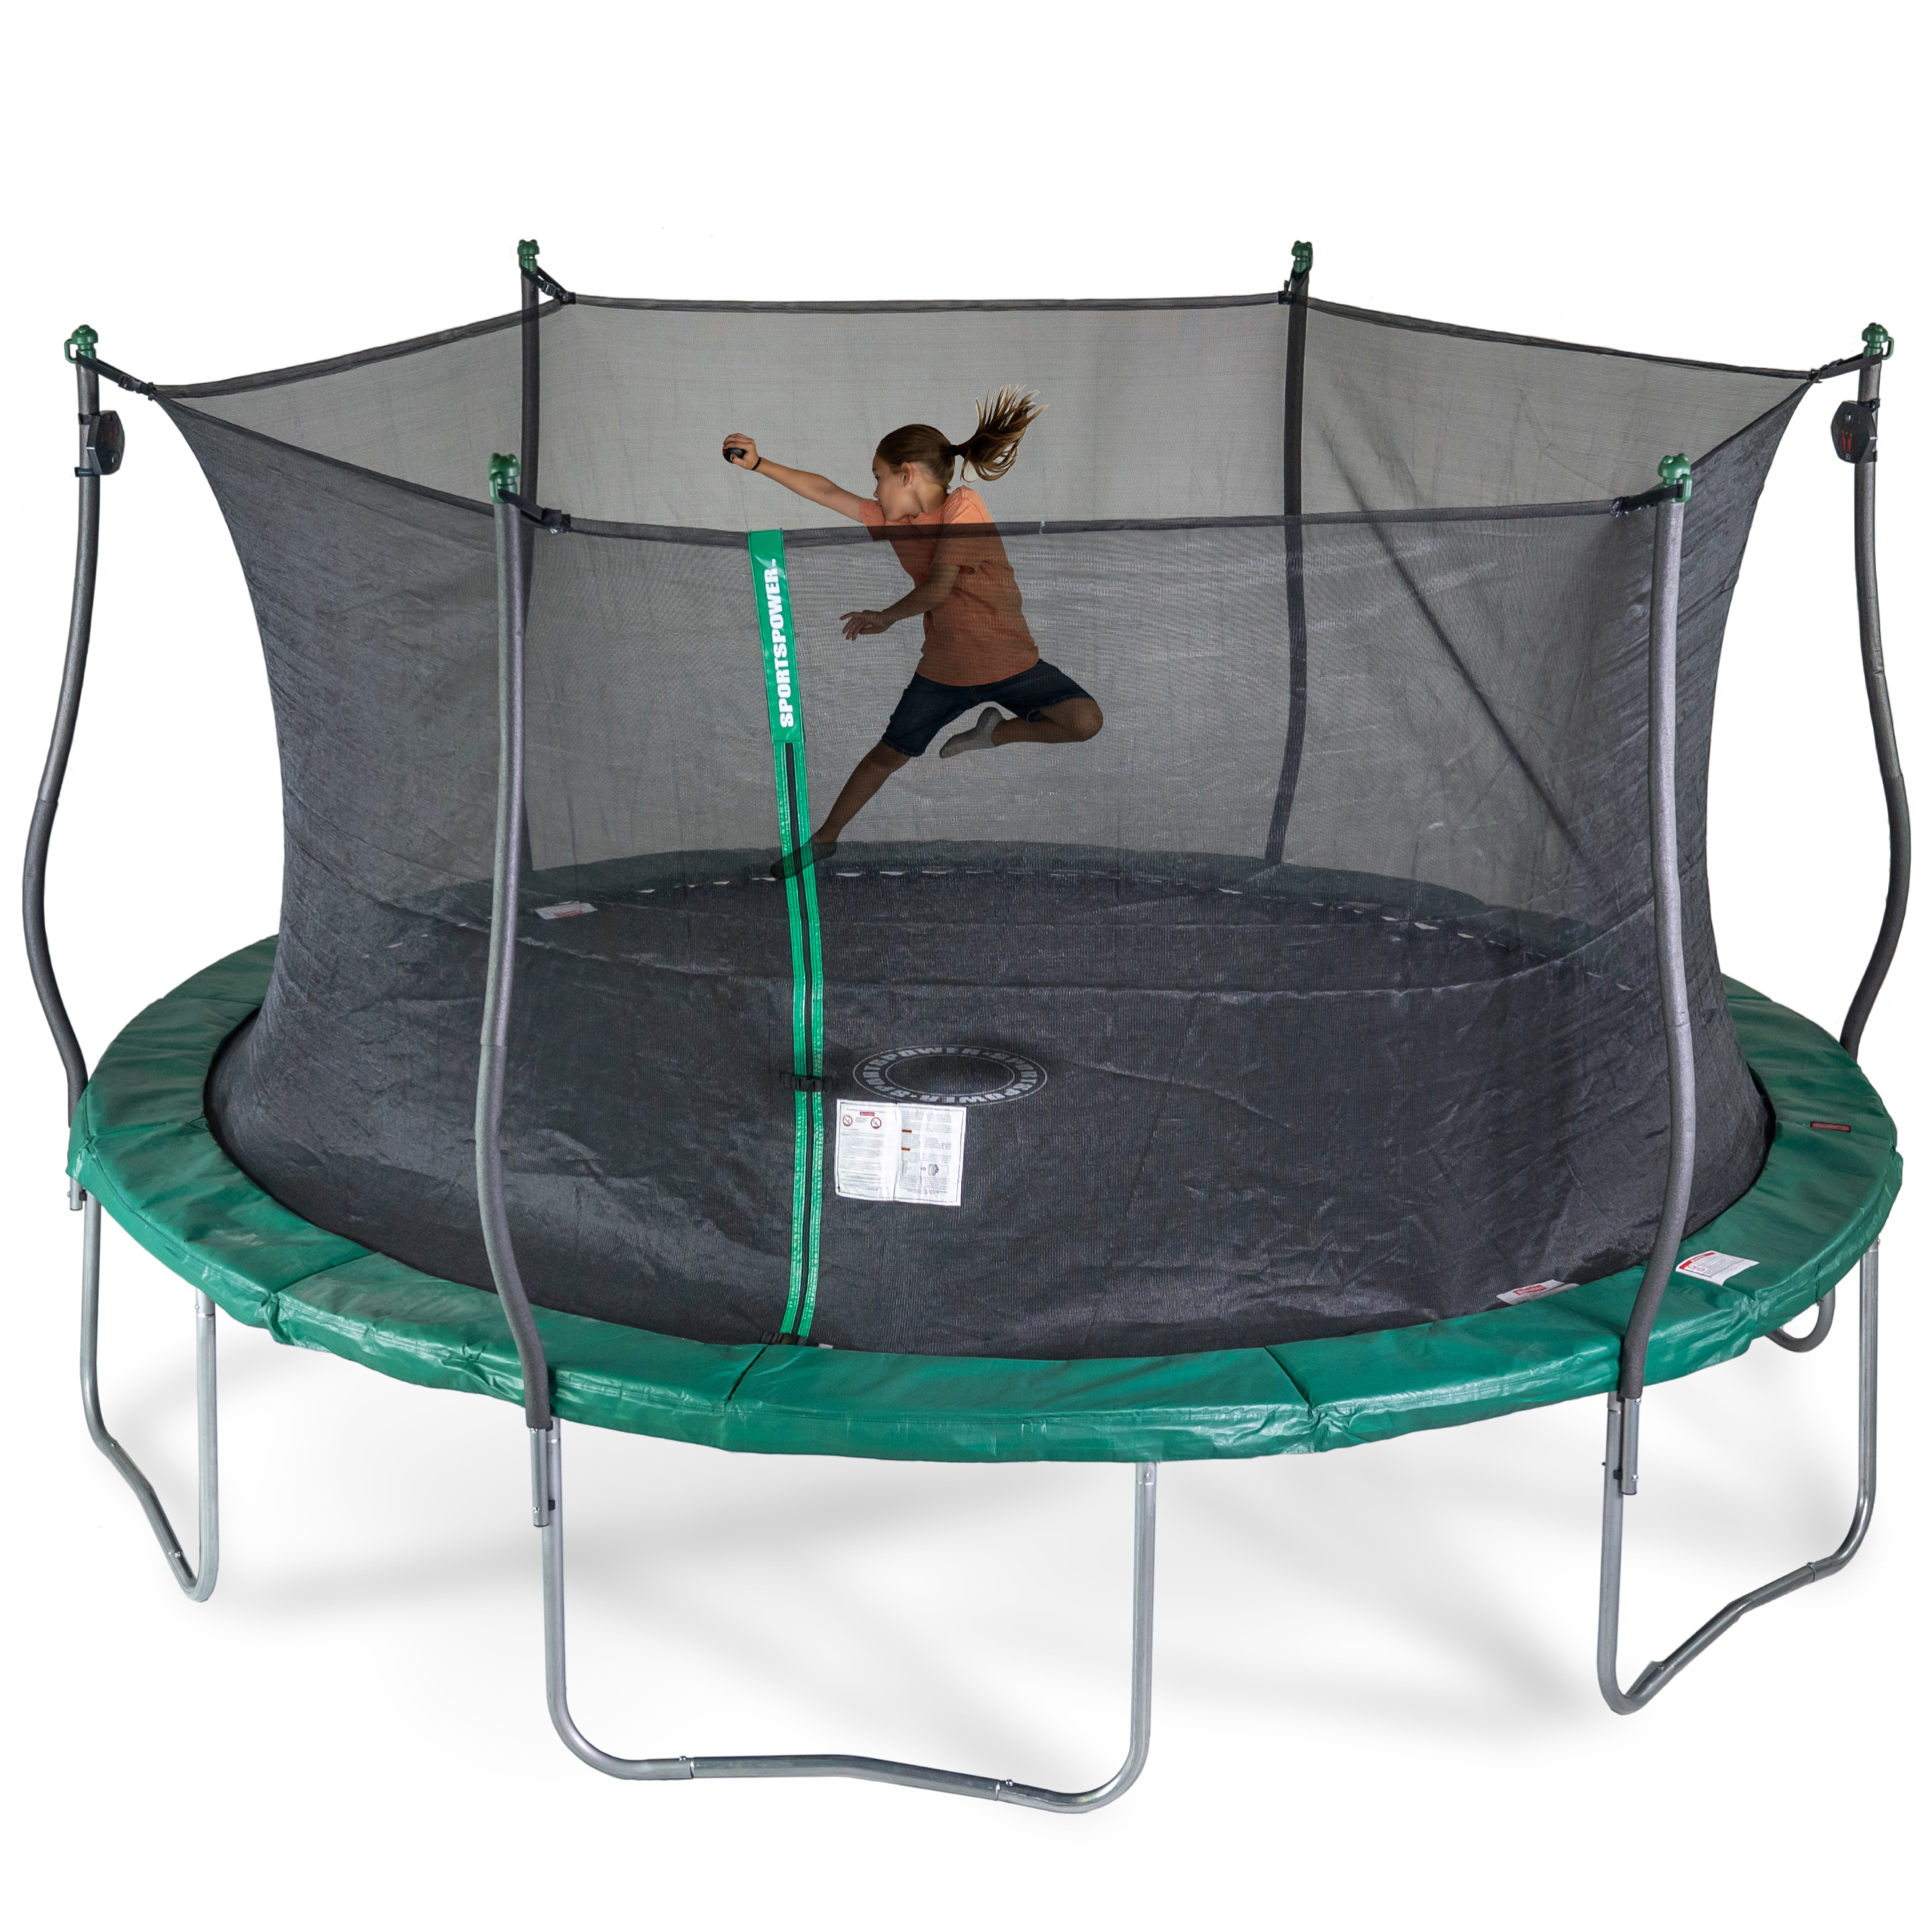 Bounce Pro 15' Trampoline, Electron Shooter Game, Basic Safety Enclosure, Green - image 1 of 7